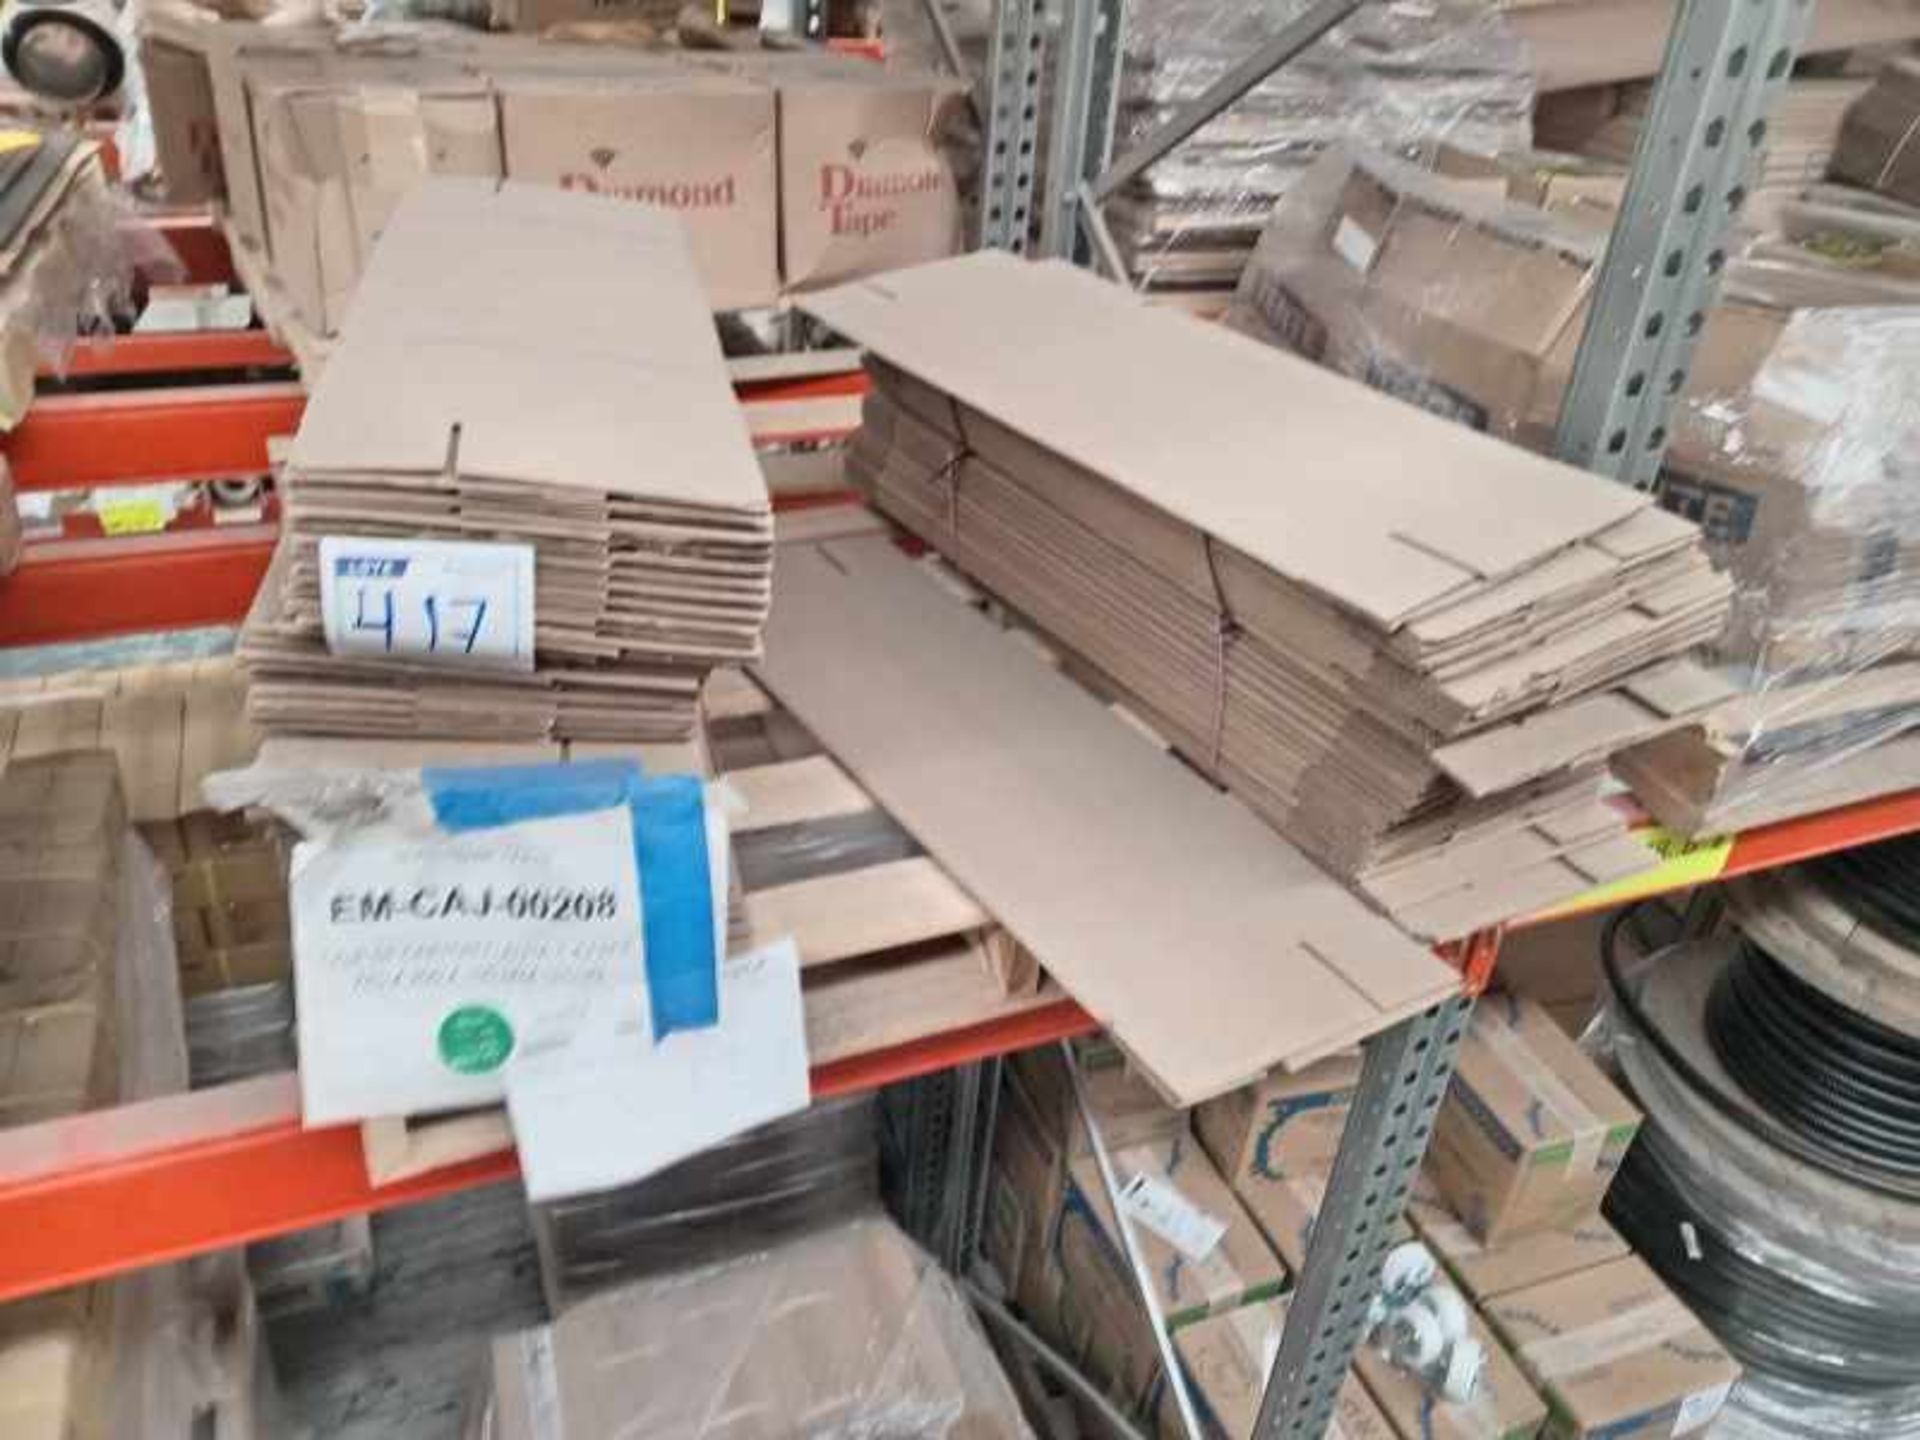 LOT OF APPROXIMATELY (83,310) PCS OF CARDBOARD BOXES AND ACCESSORIES - Image 33 of 119